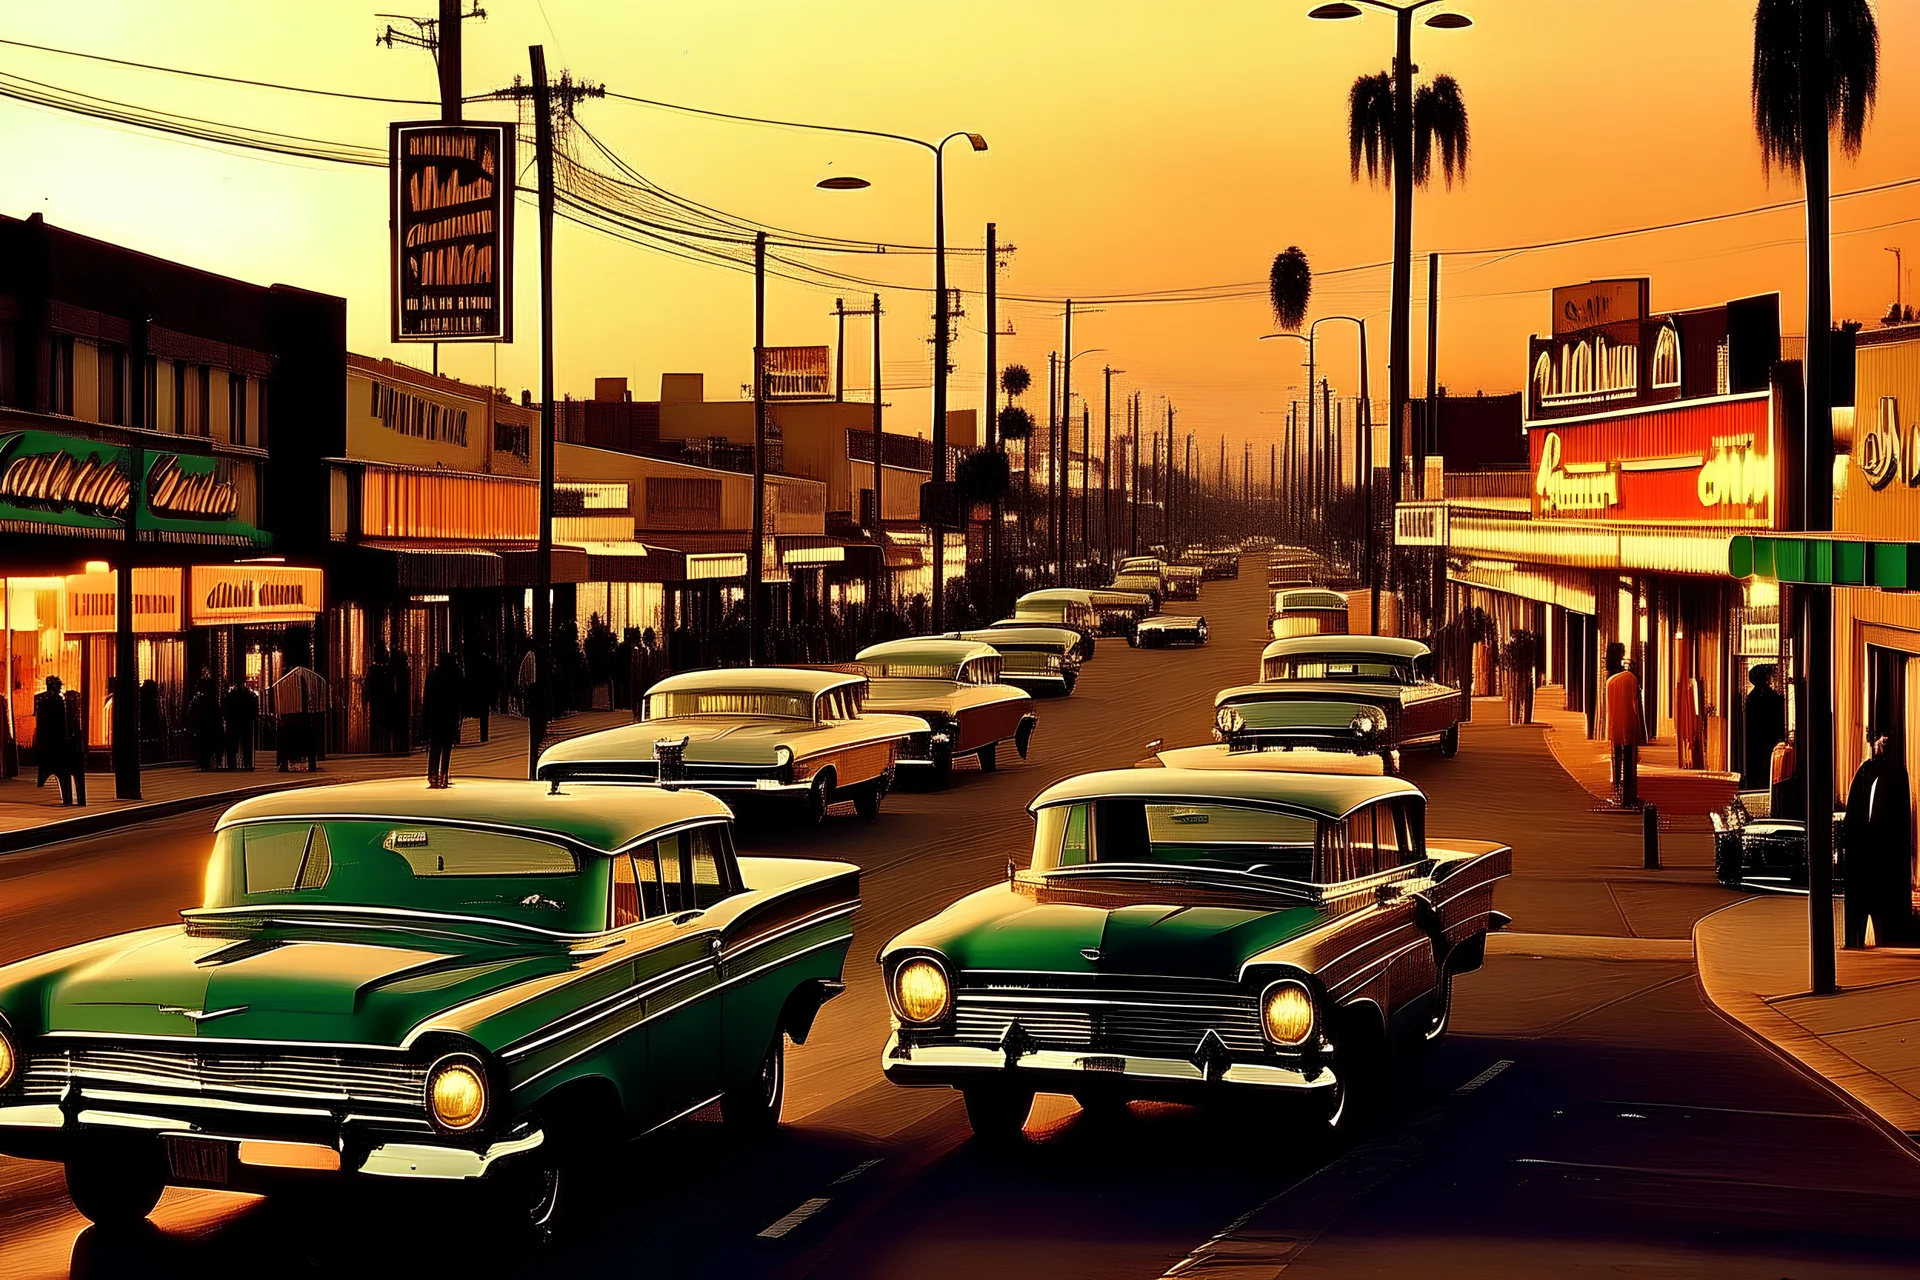 1960s vibe Los angeles california kind of city when the sun is setting